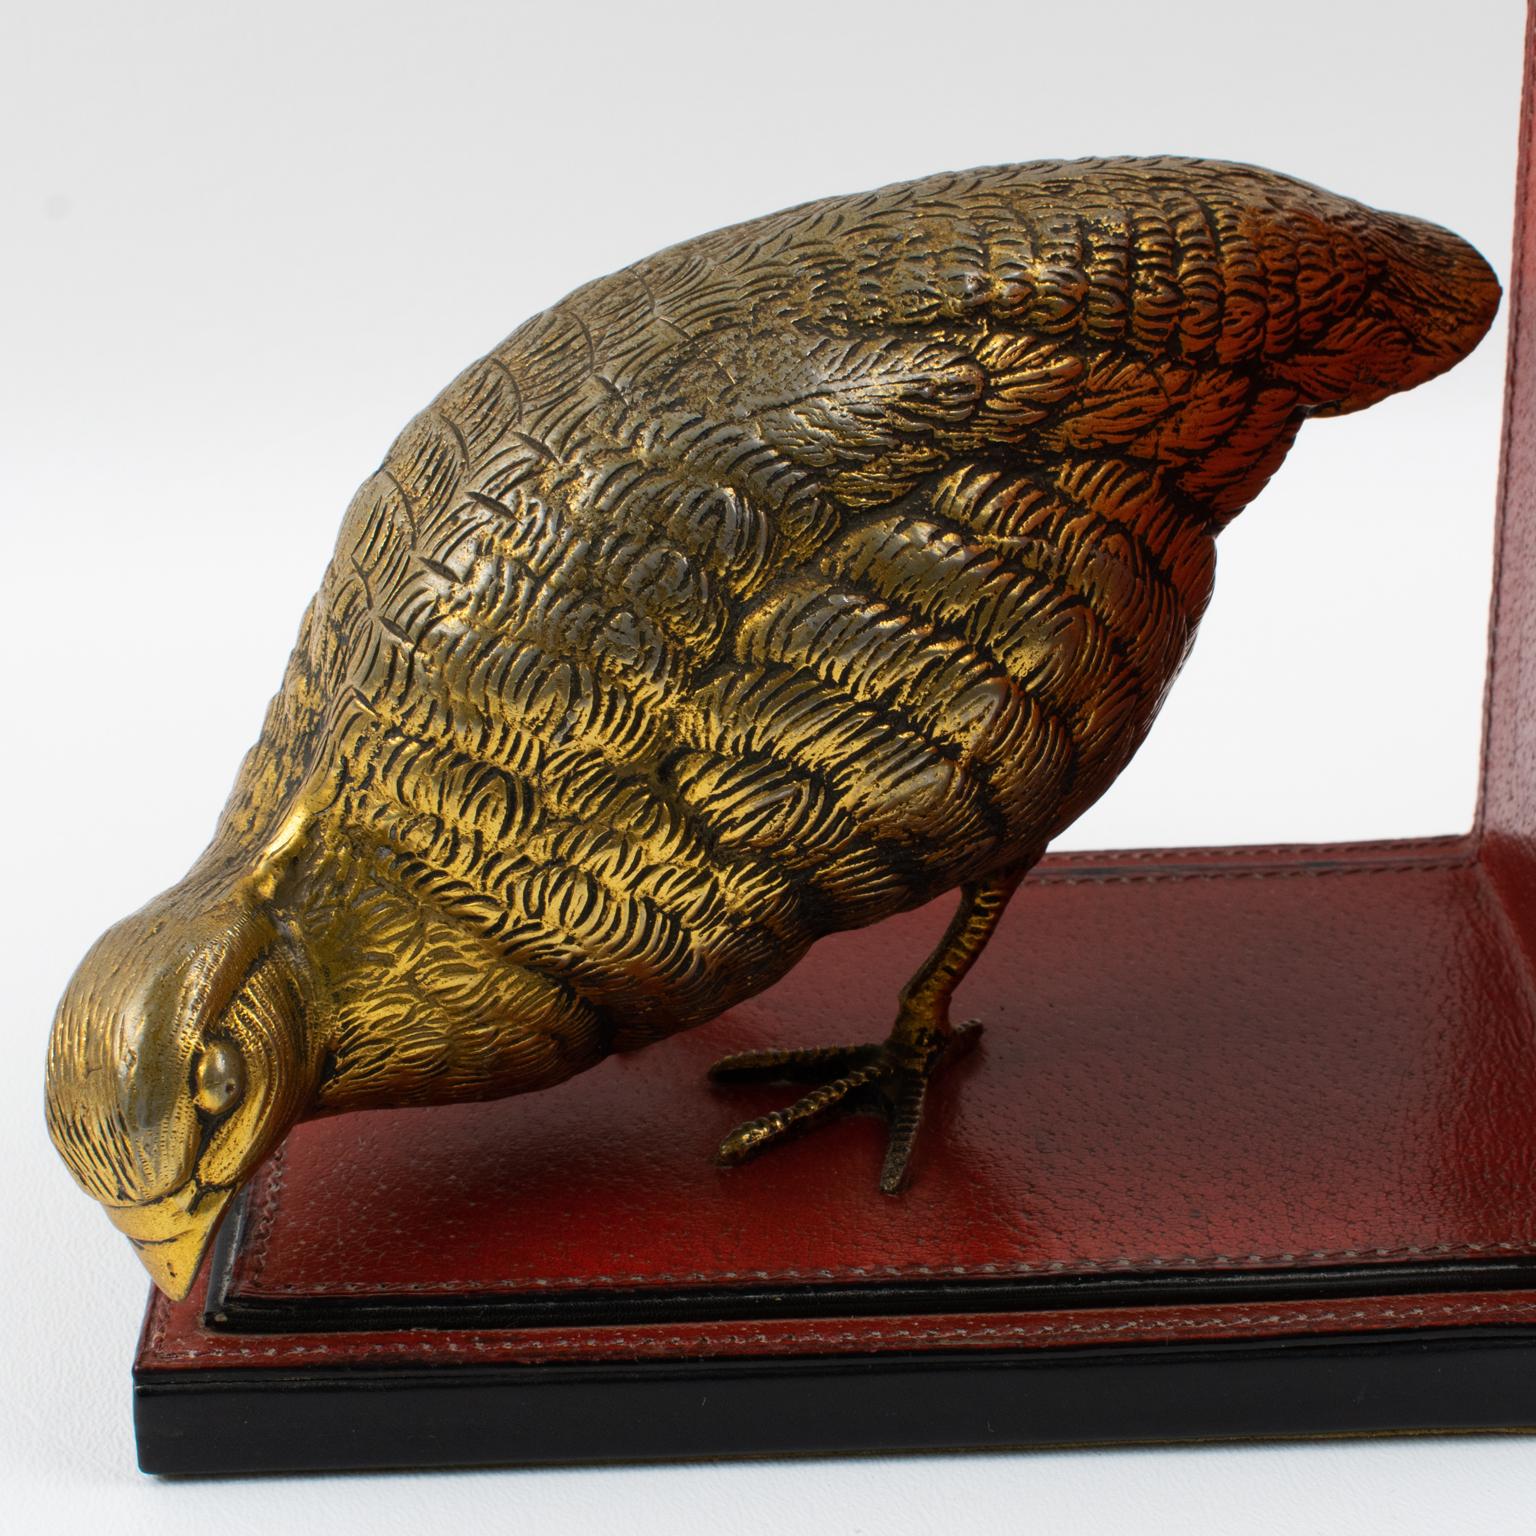 Gucci Italy Hand-Stitched Red Leather Bookends with Gilt Metal Partridges, 1970s For Sale 4